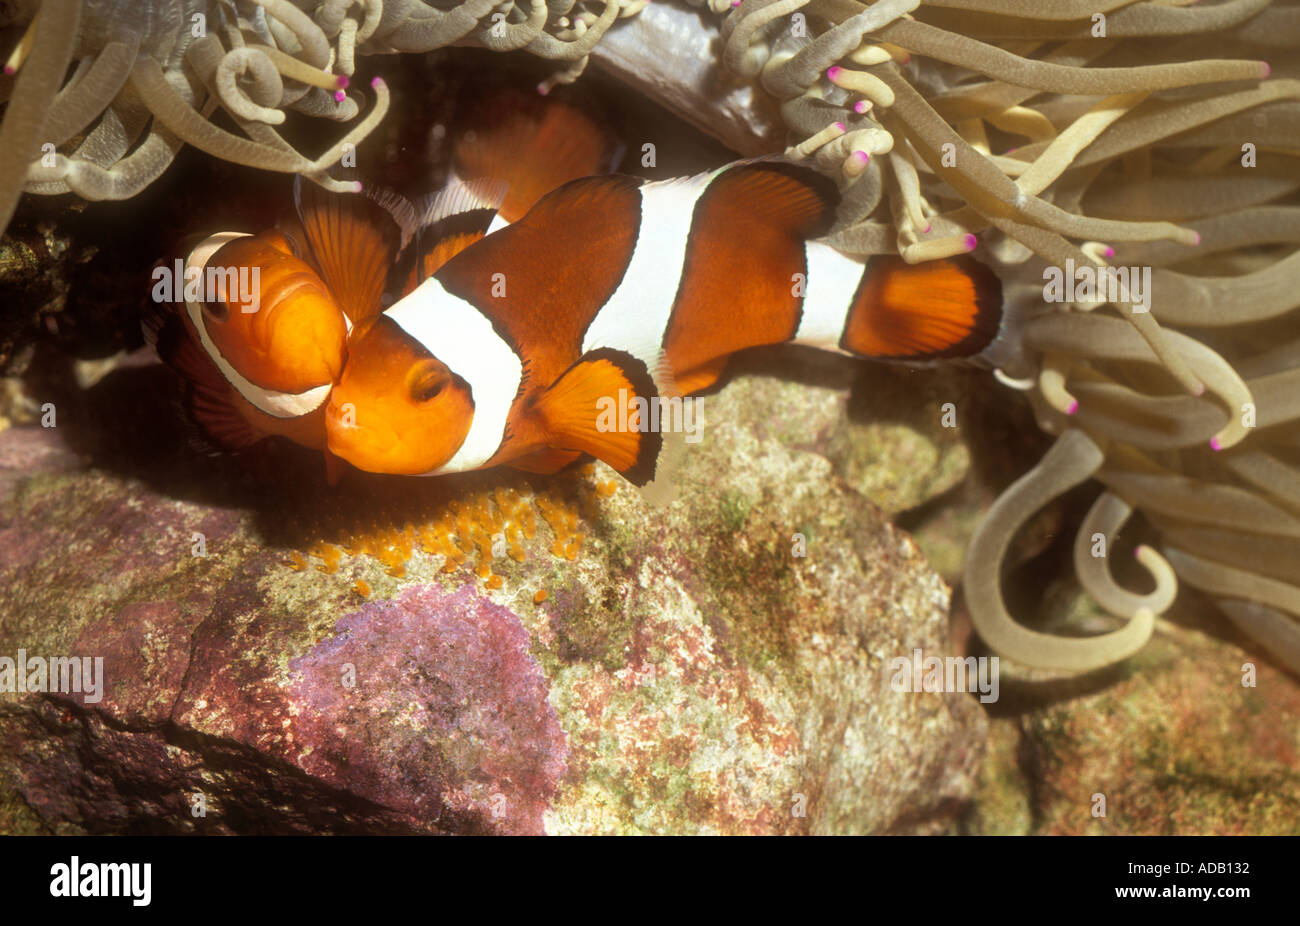 Mating Common Clownfish Amphiprion ocellaris laying eggs beside anemone  Malaysia Indonesia Stock Photo - Alamy